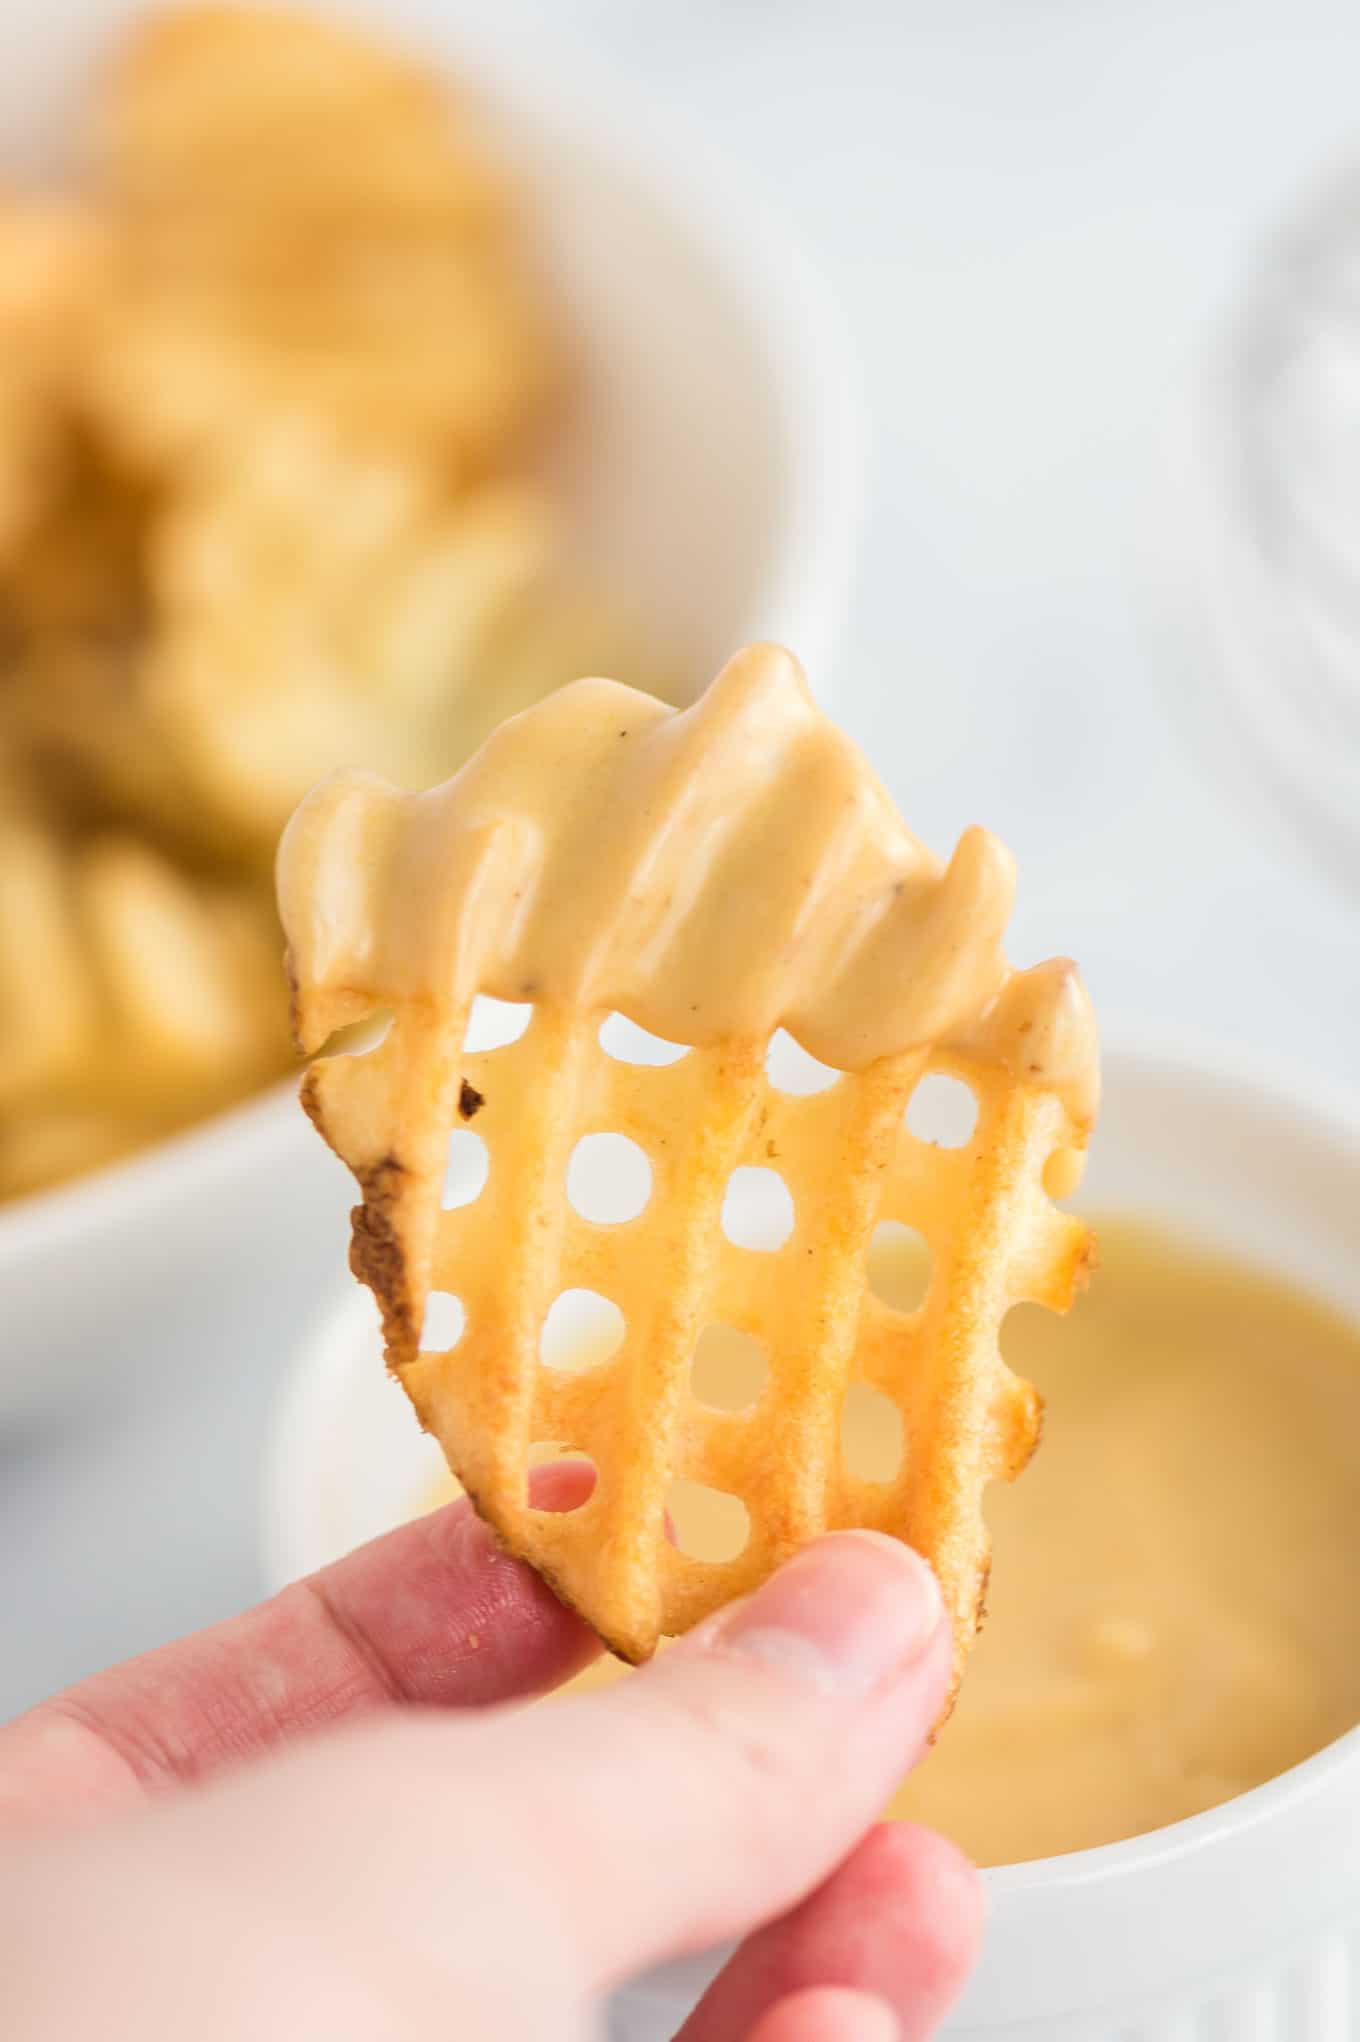 waffle fry dipped in sauce